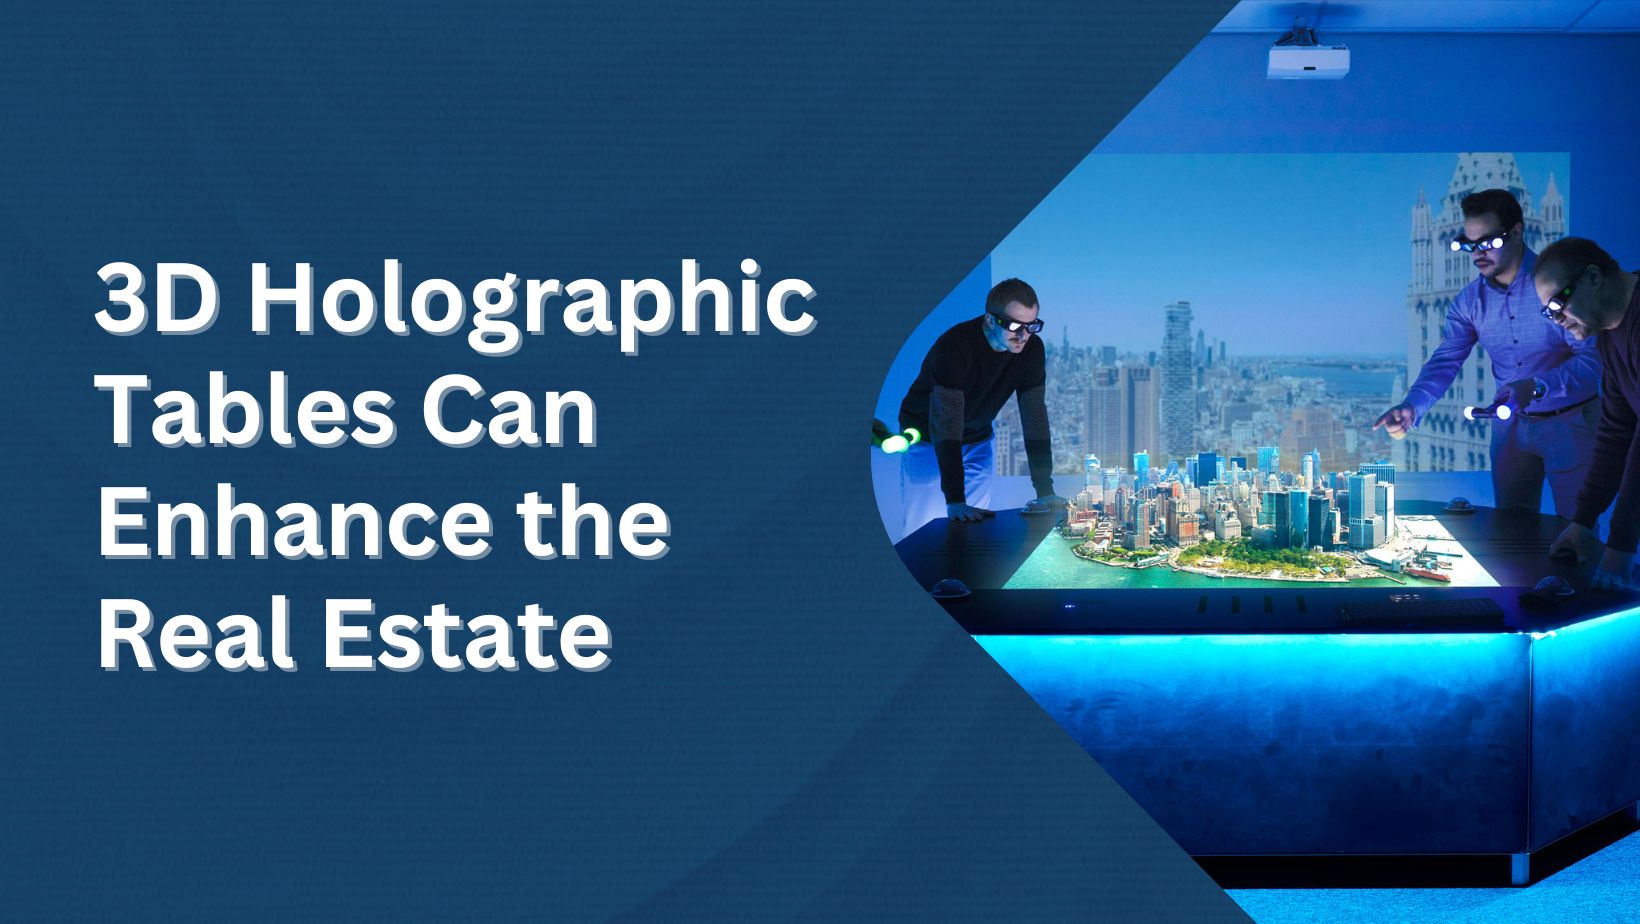 How 3D Holographic Table Can Enhance the Real Estate Buying Experience?